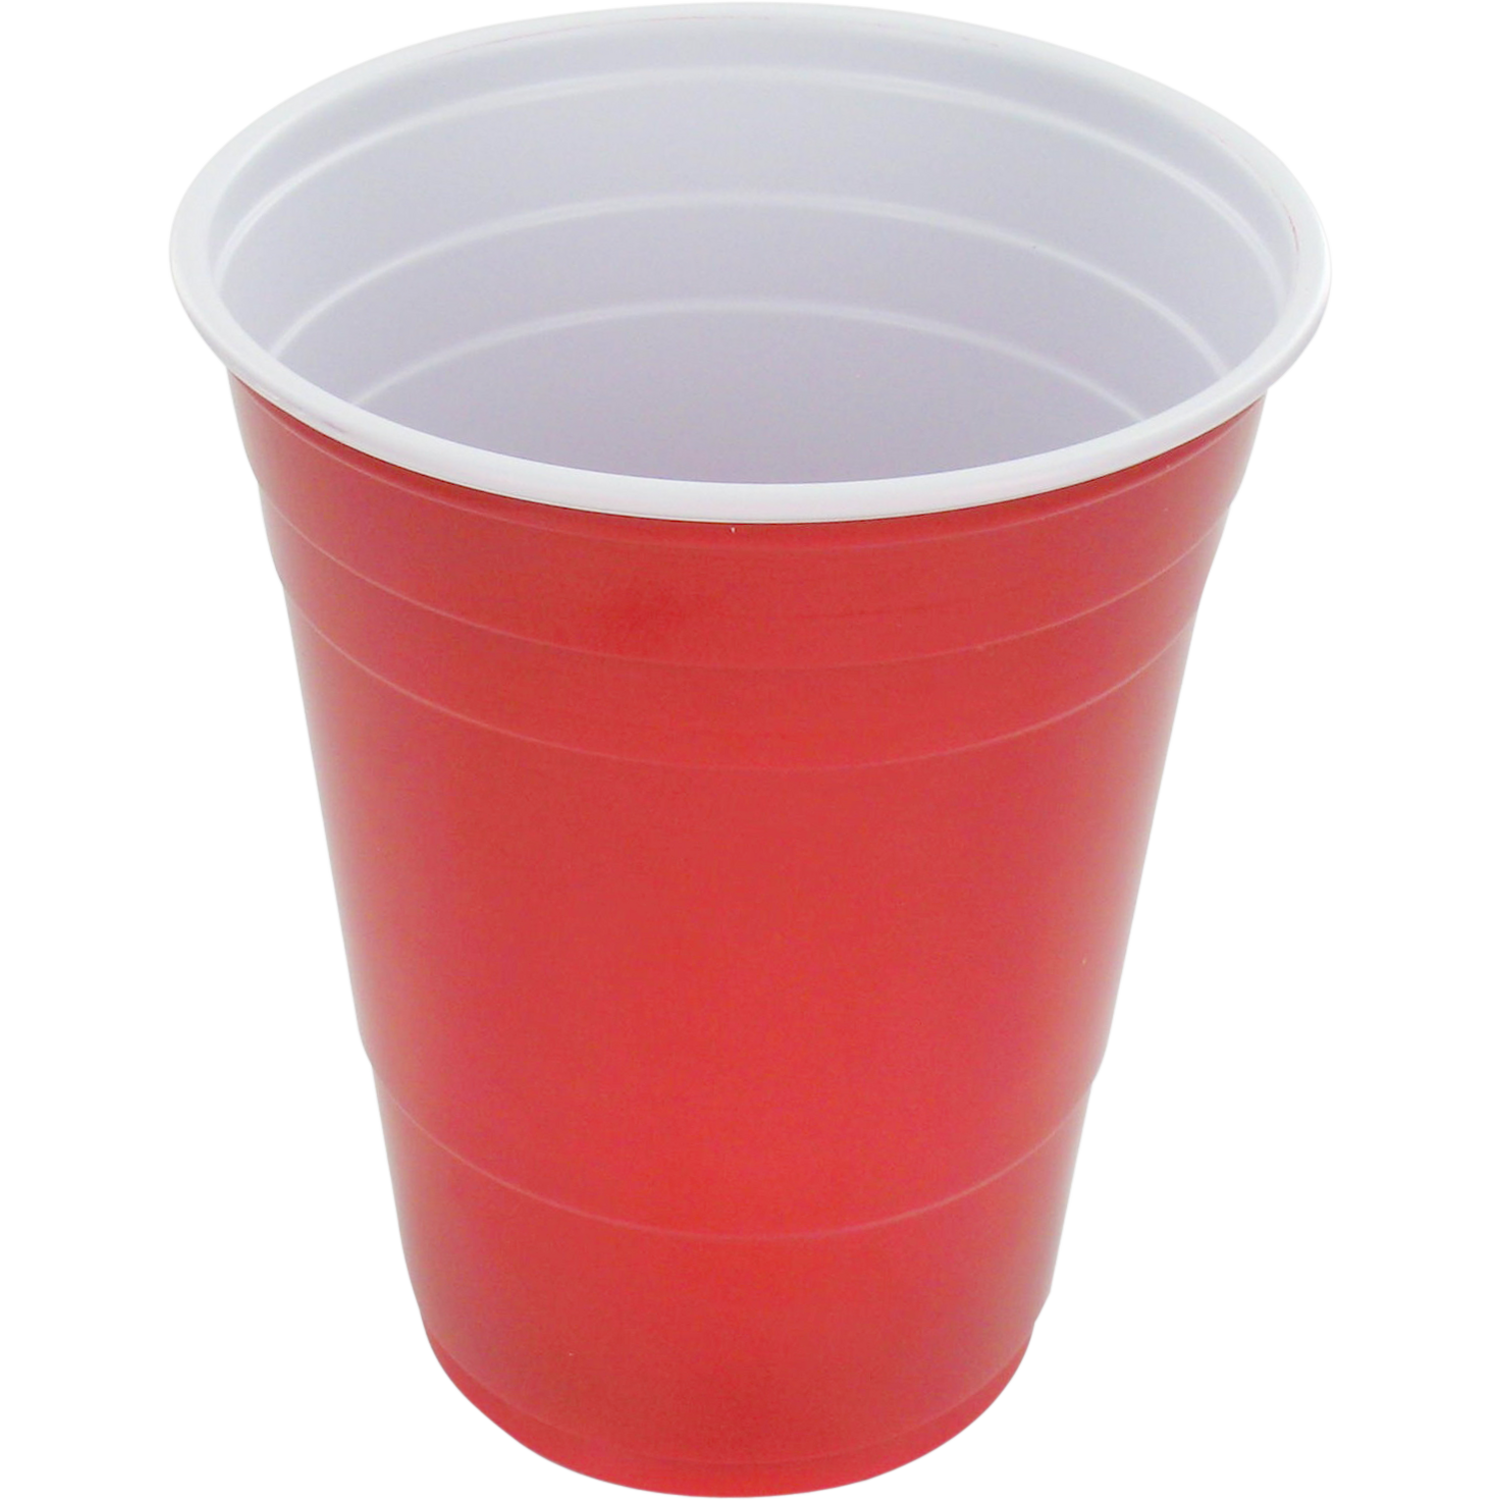  Partycup, PS, 400ml, 16oz, rood 1